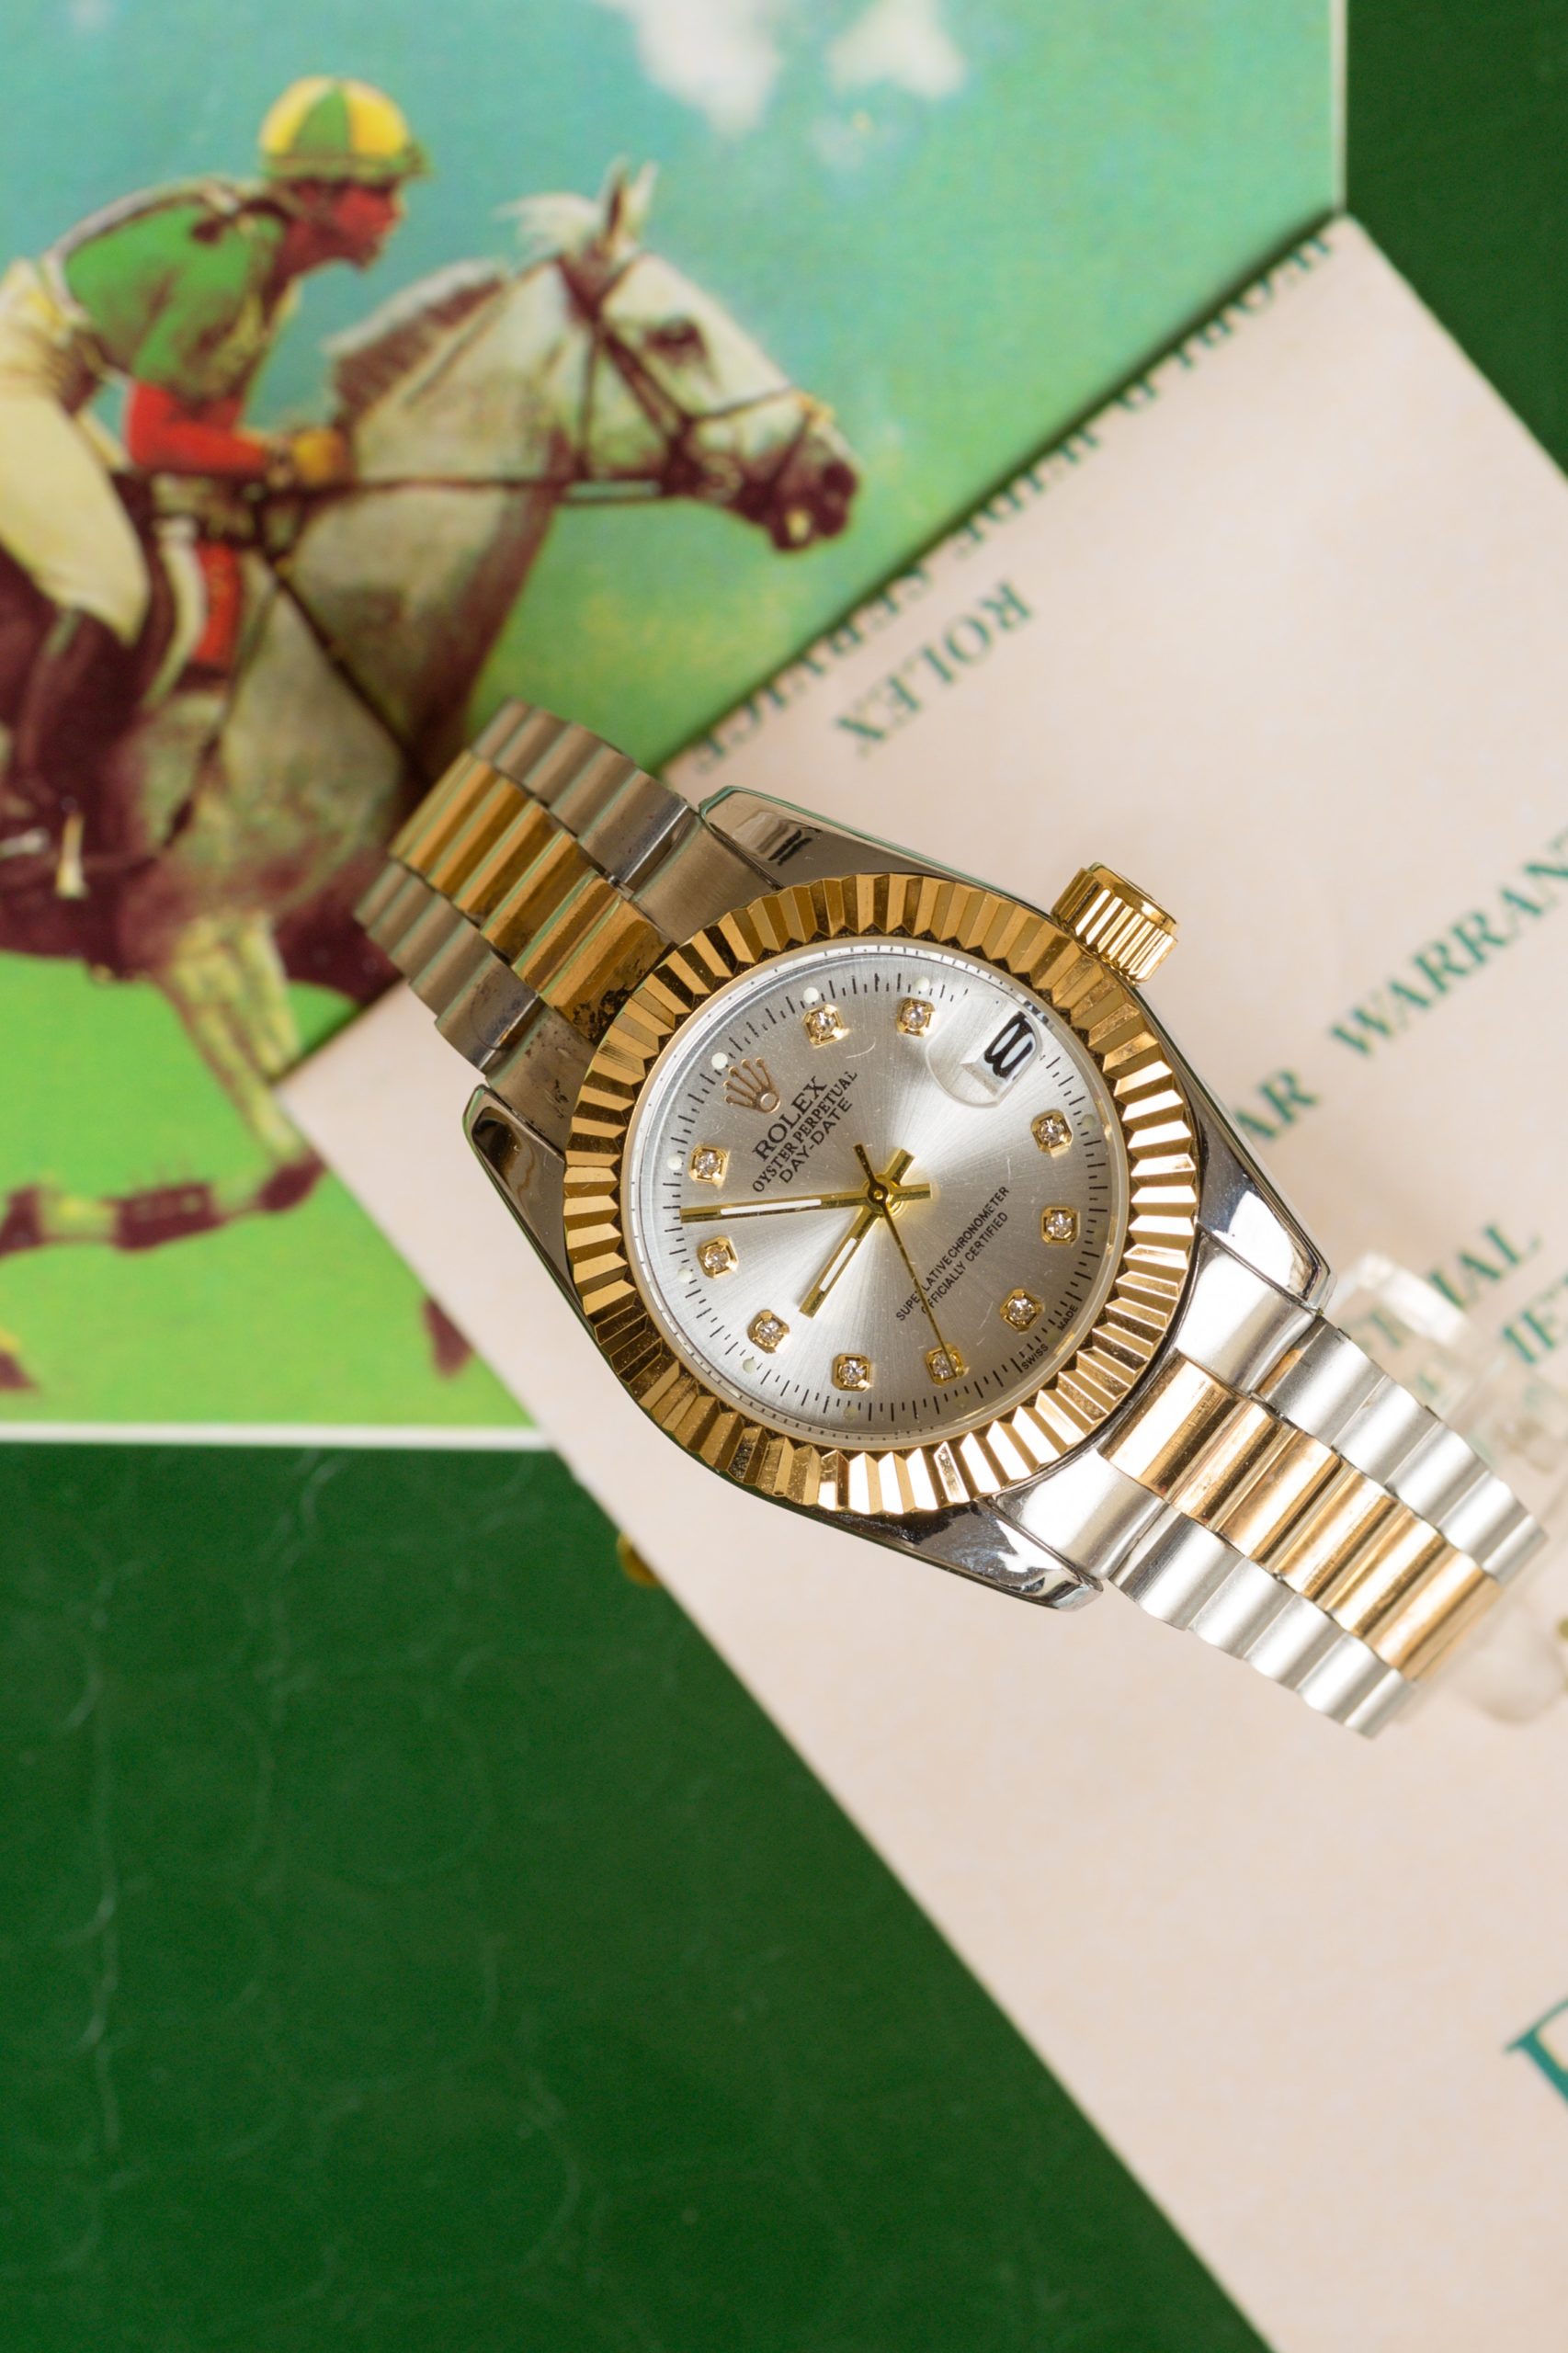 Tips for a Successful Rolex Purchase